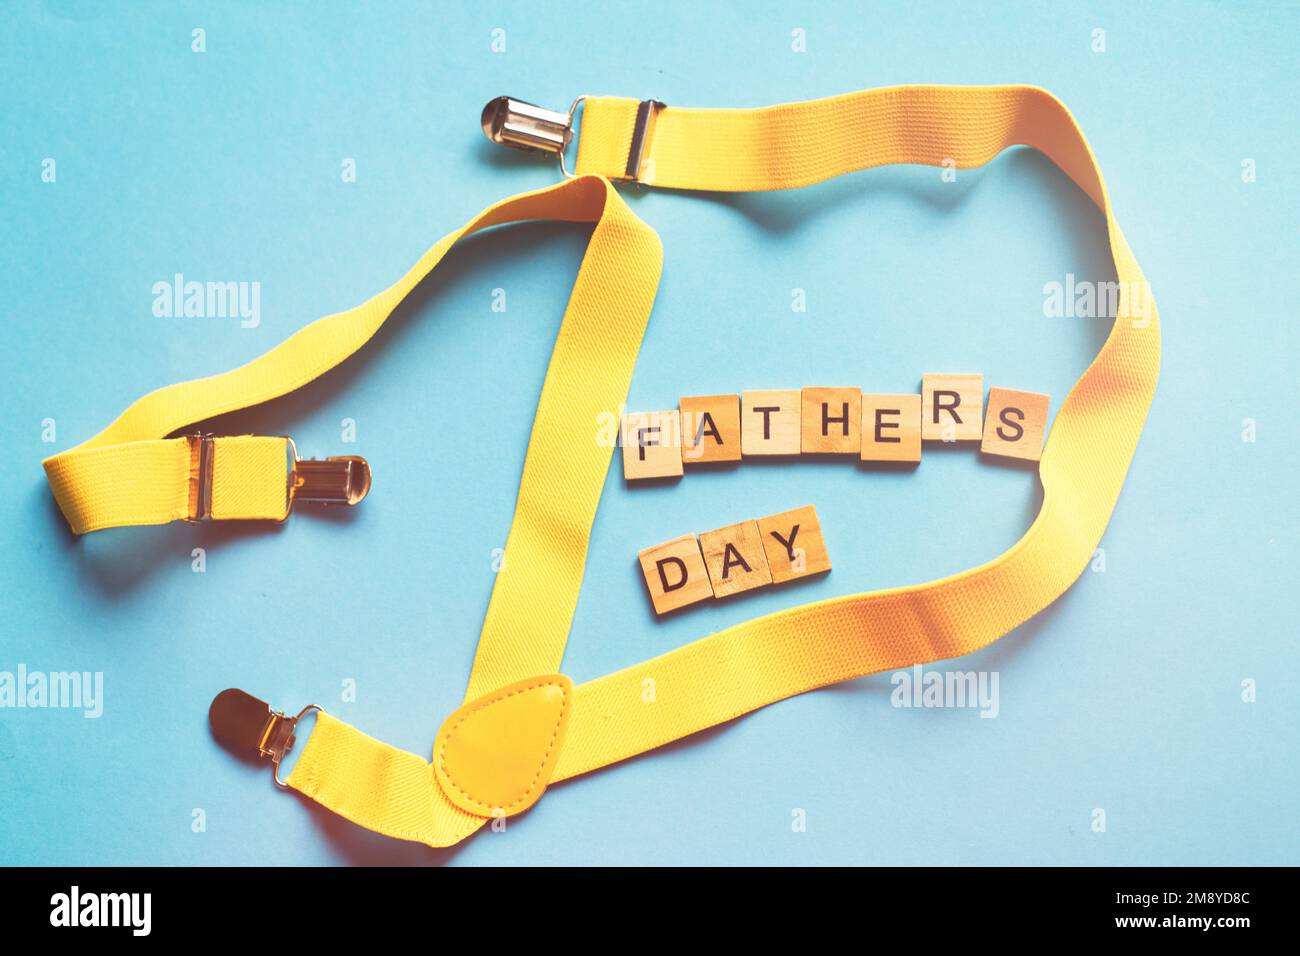 happy father's day lettering made by wooden cubes on a blue background with a yellow suspenders. Stock Photo